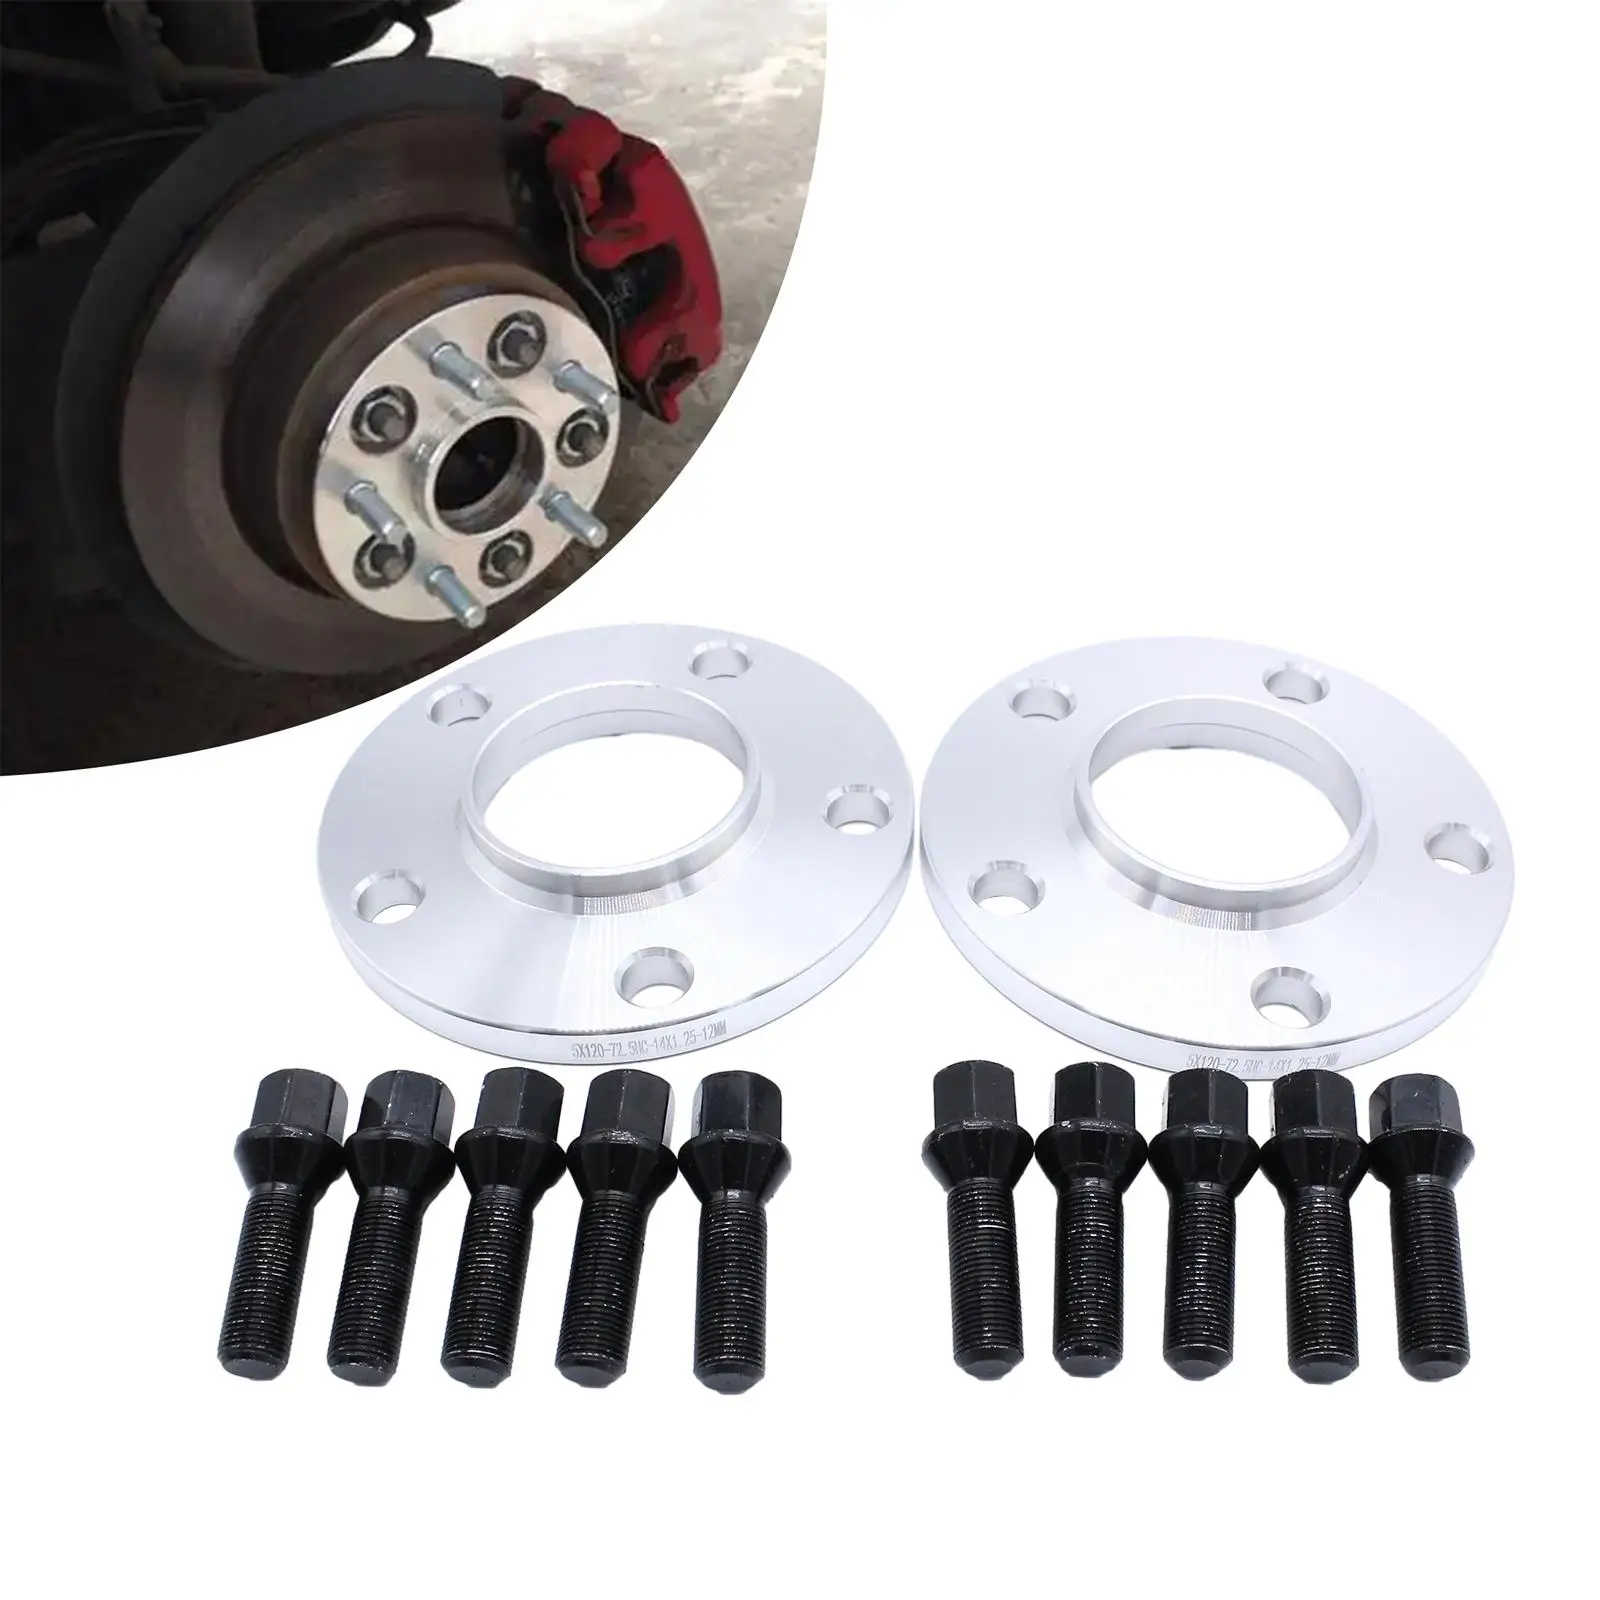 2x Wheel Spacers Metal Easy to Install Hub Bore 72.5mm for Ford Ranger